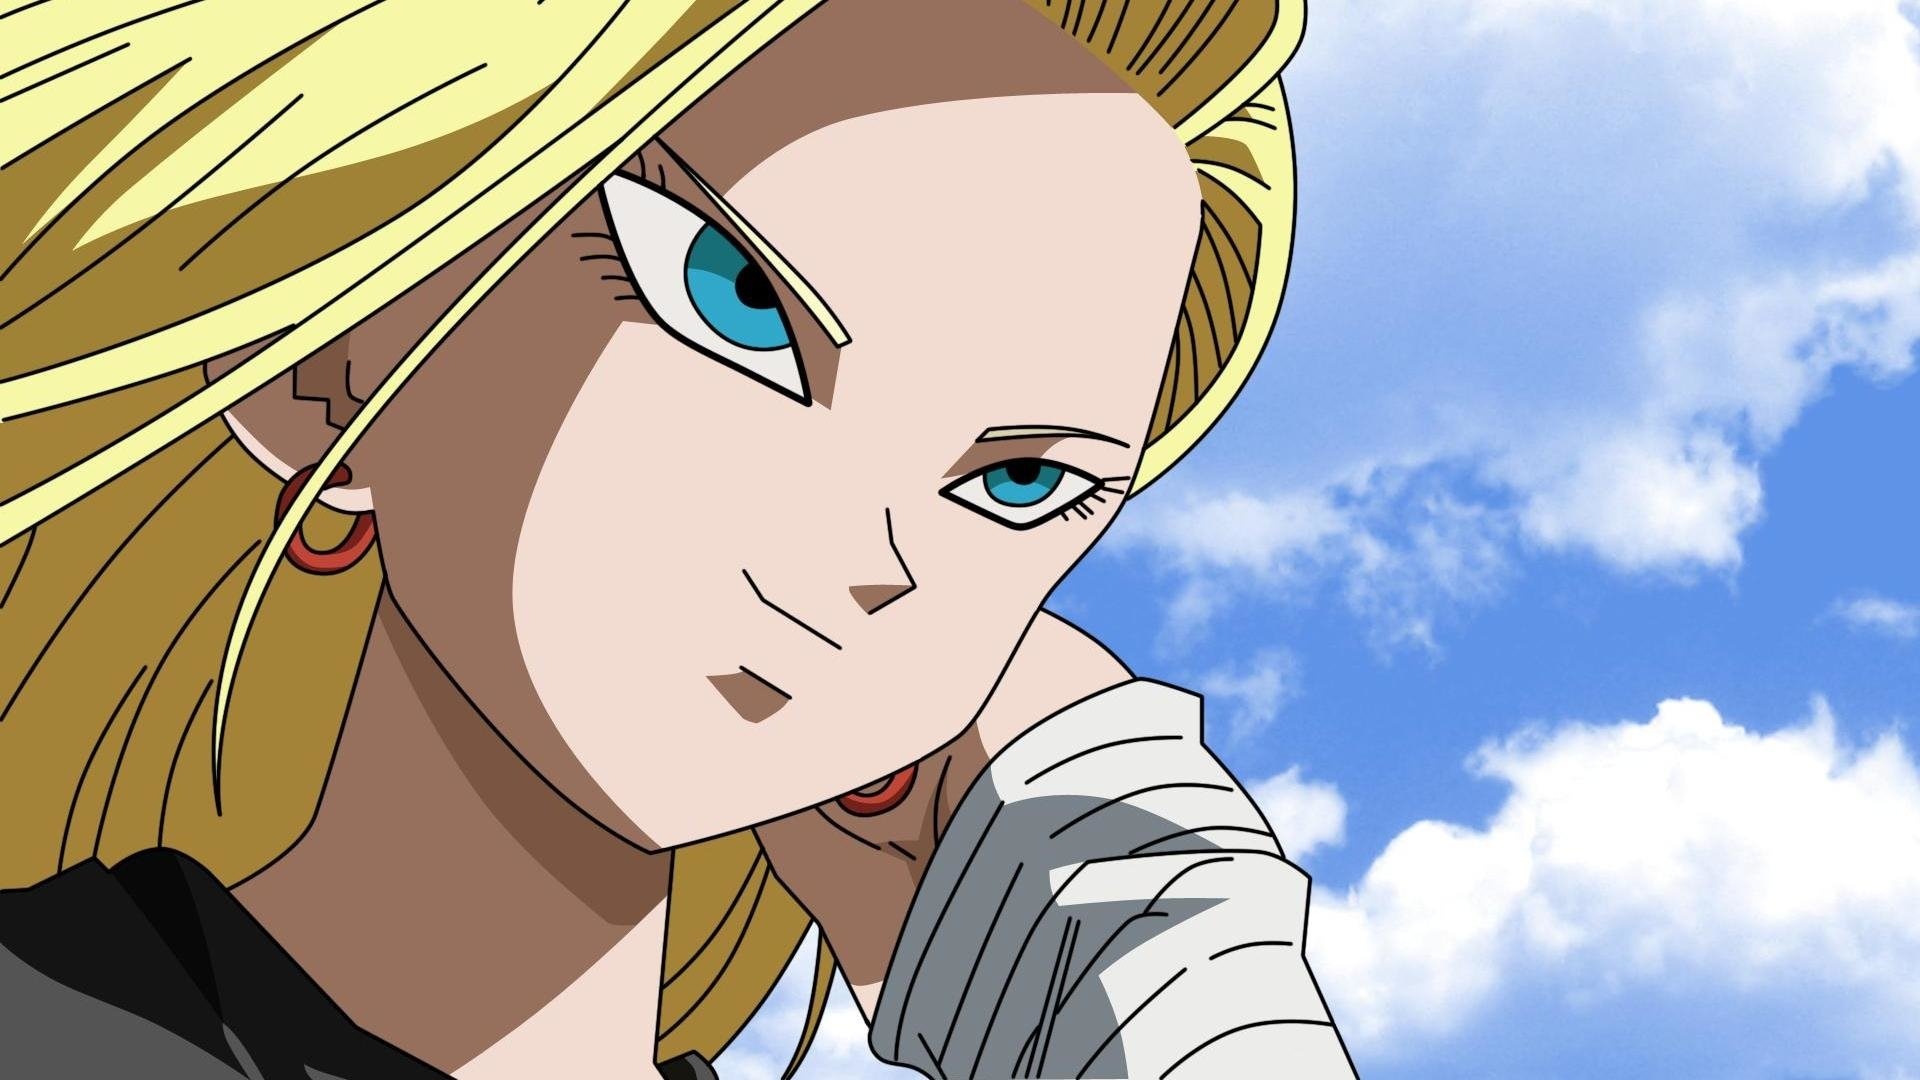 Anime Dragon Ball Z, Android 18 Playmat, Collectible, 1920x1080 Full HD Desktop